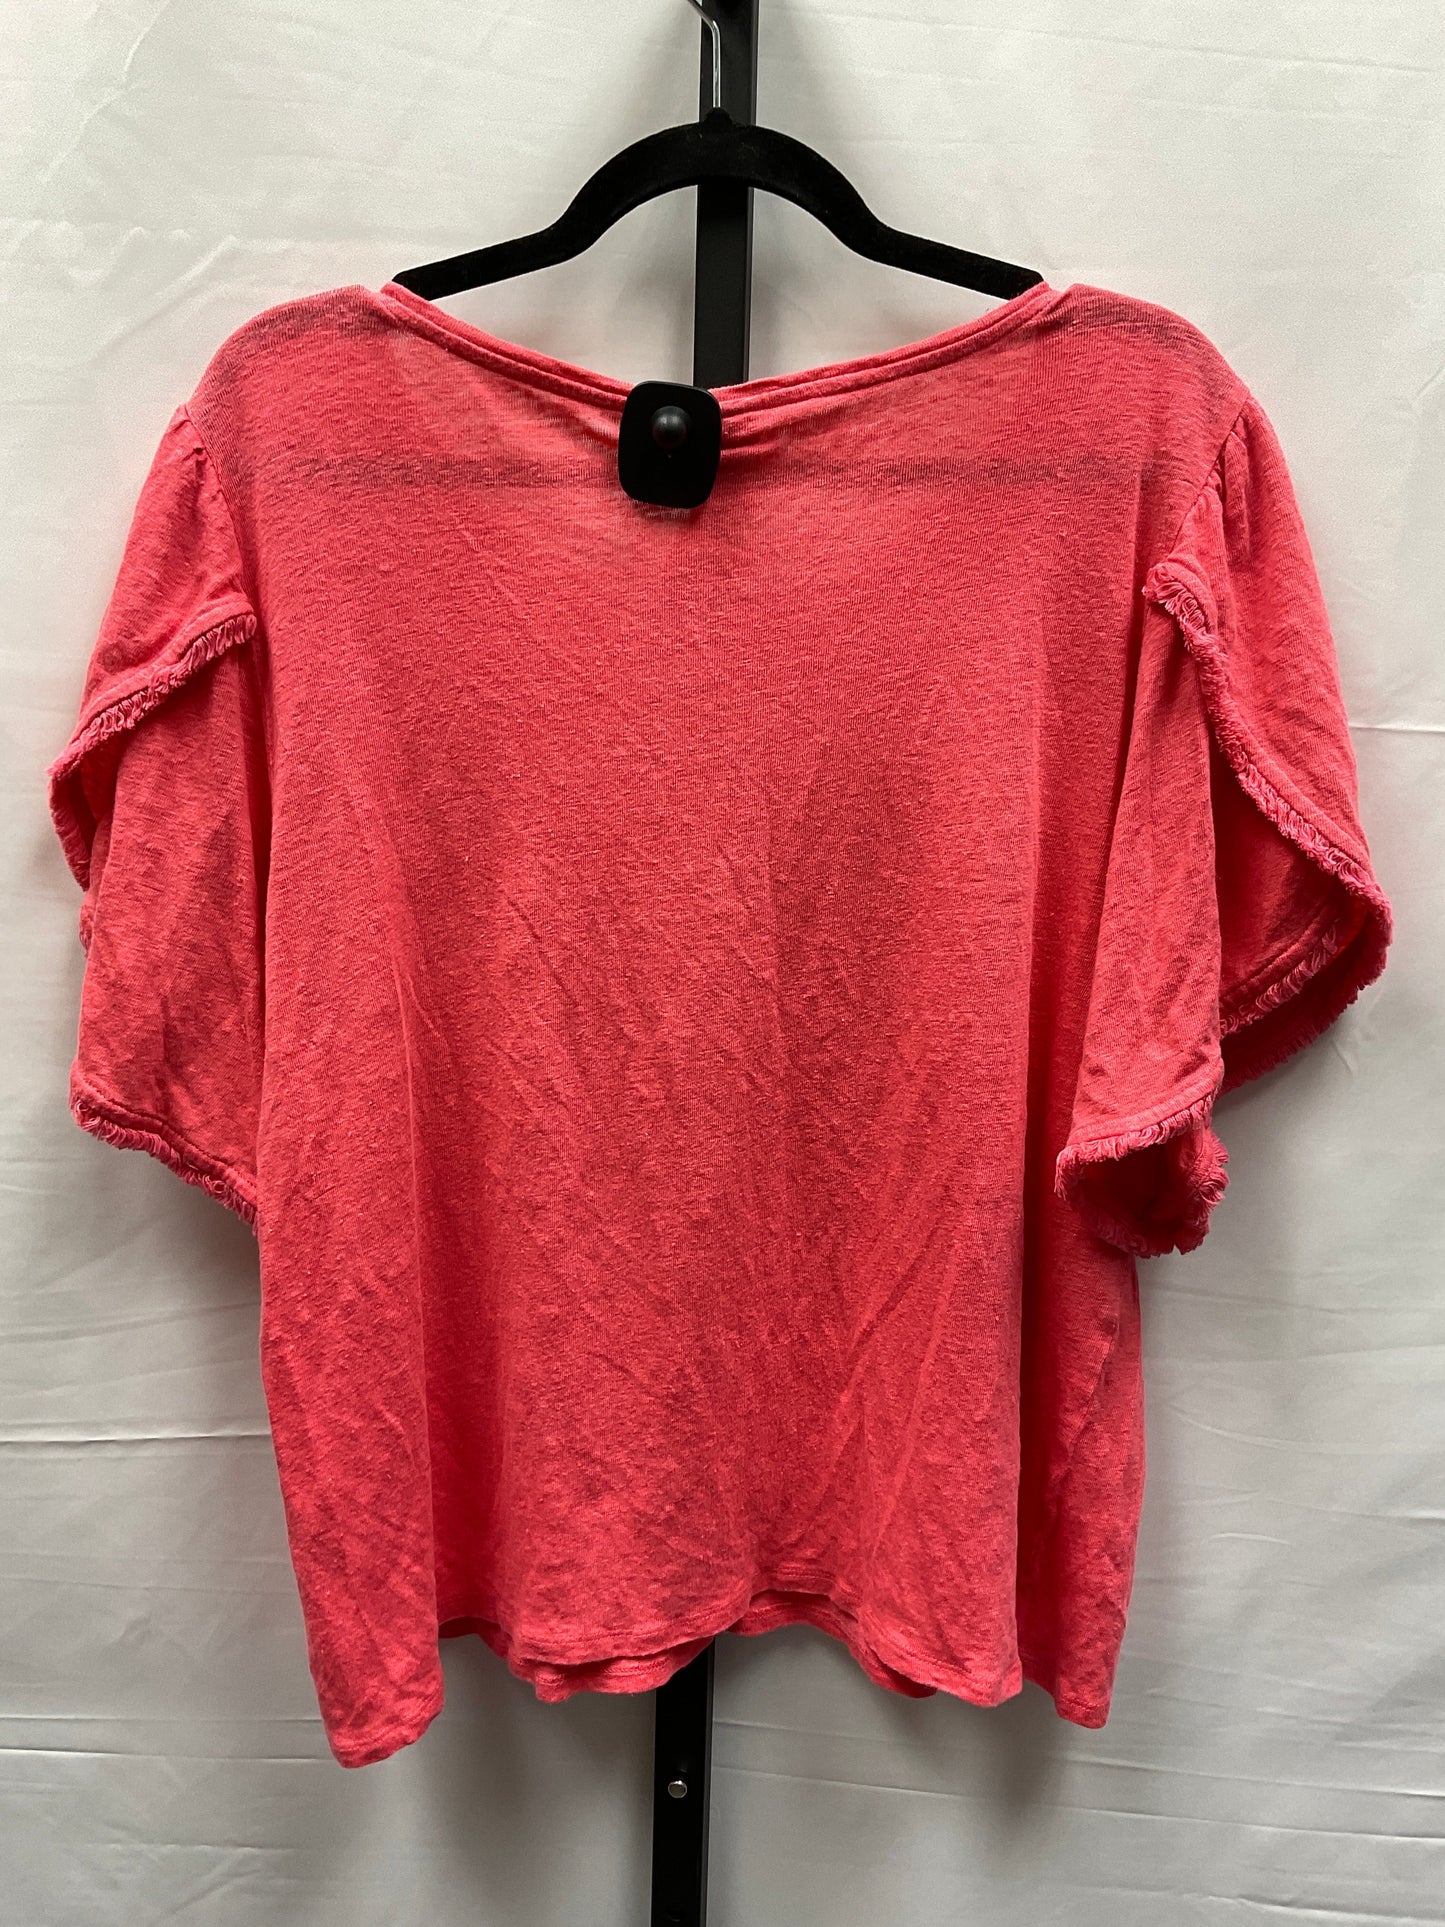 Coral Top Short Sleeve Chicos, Size Xl